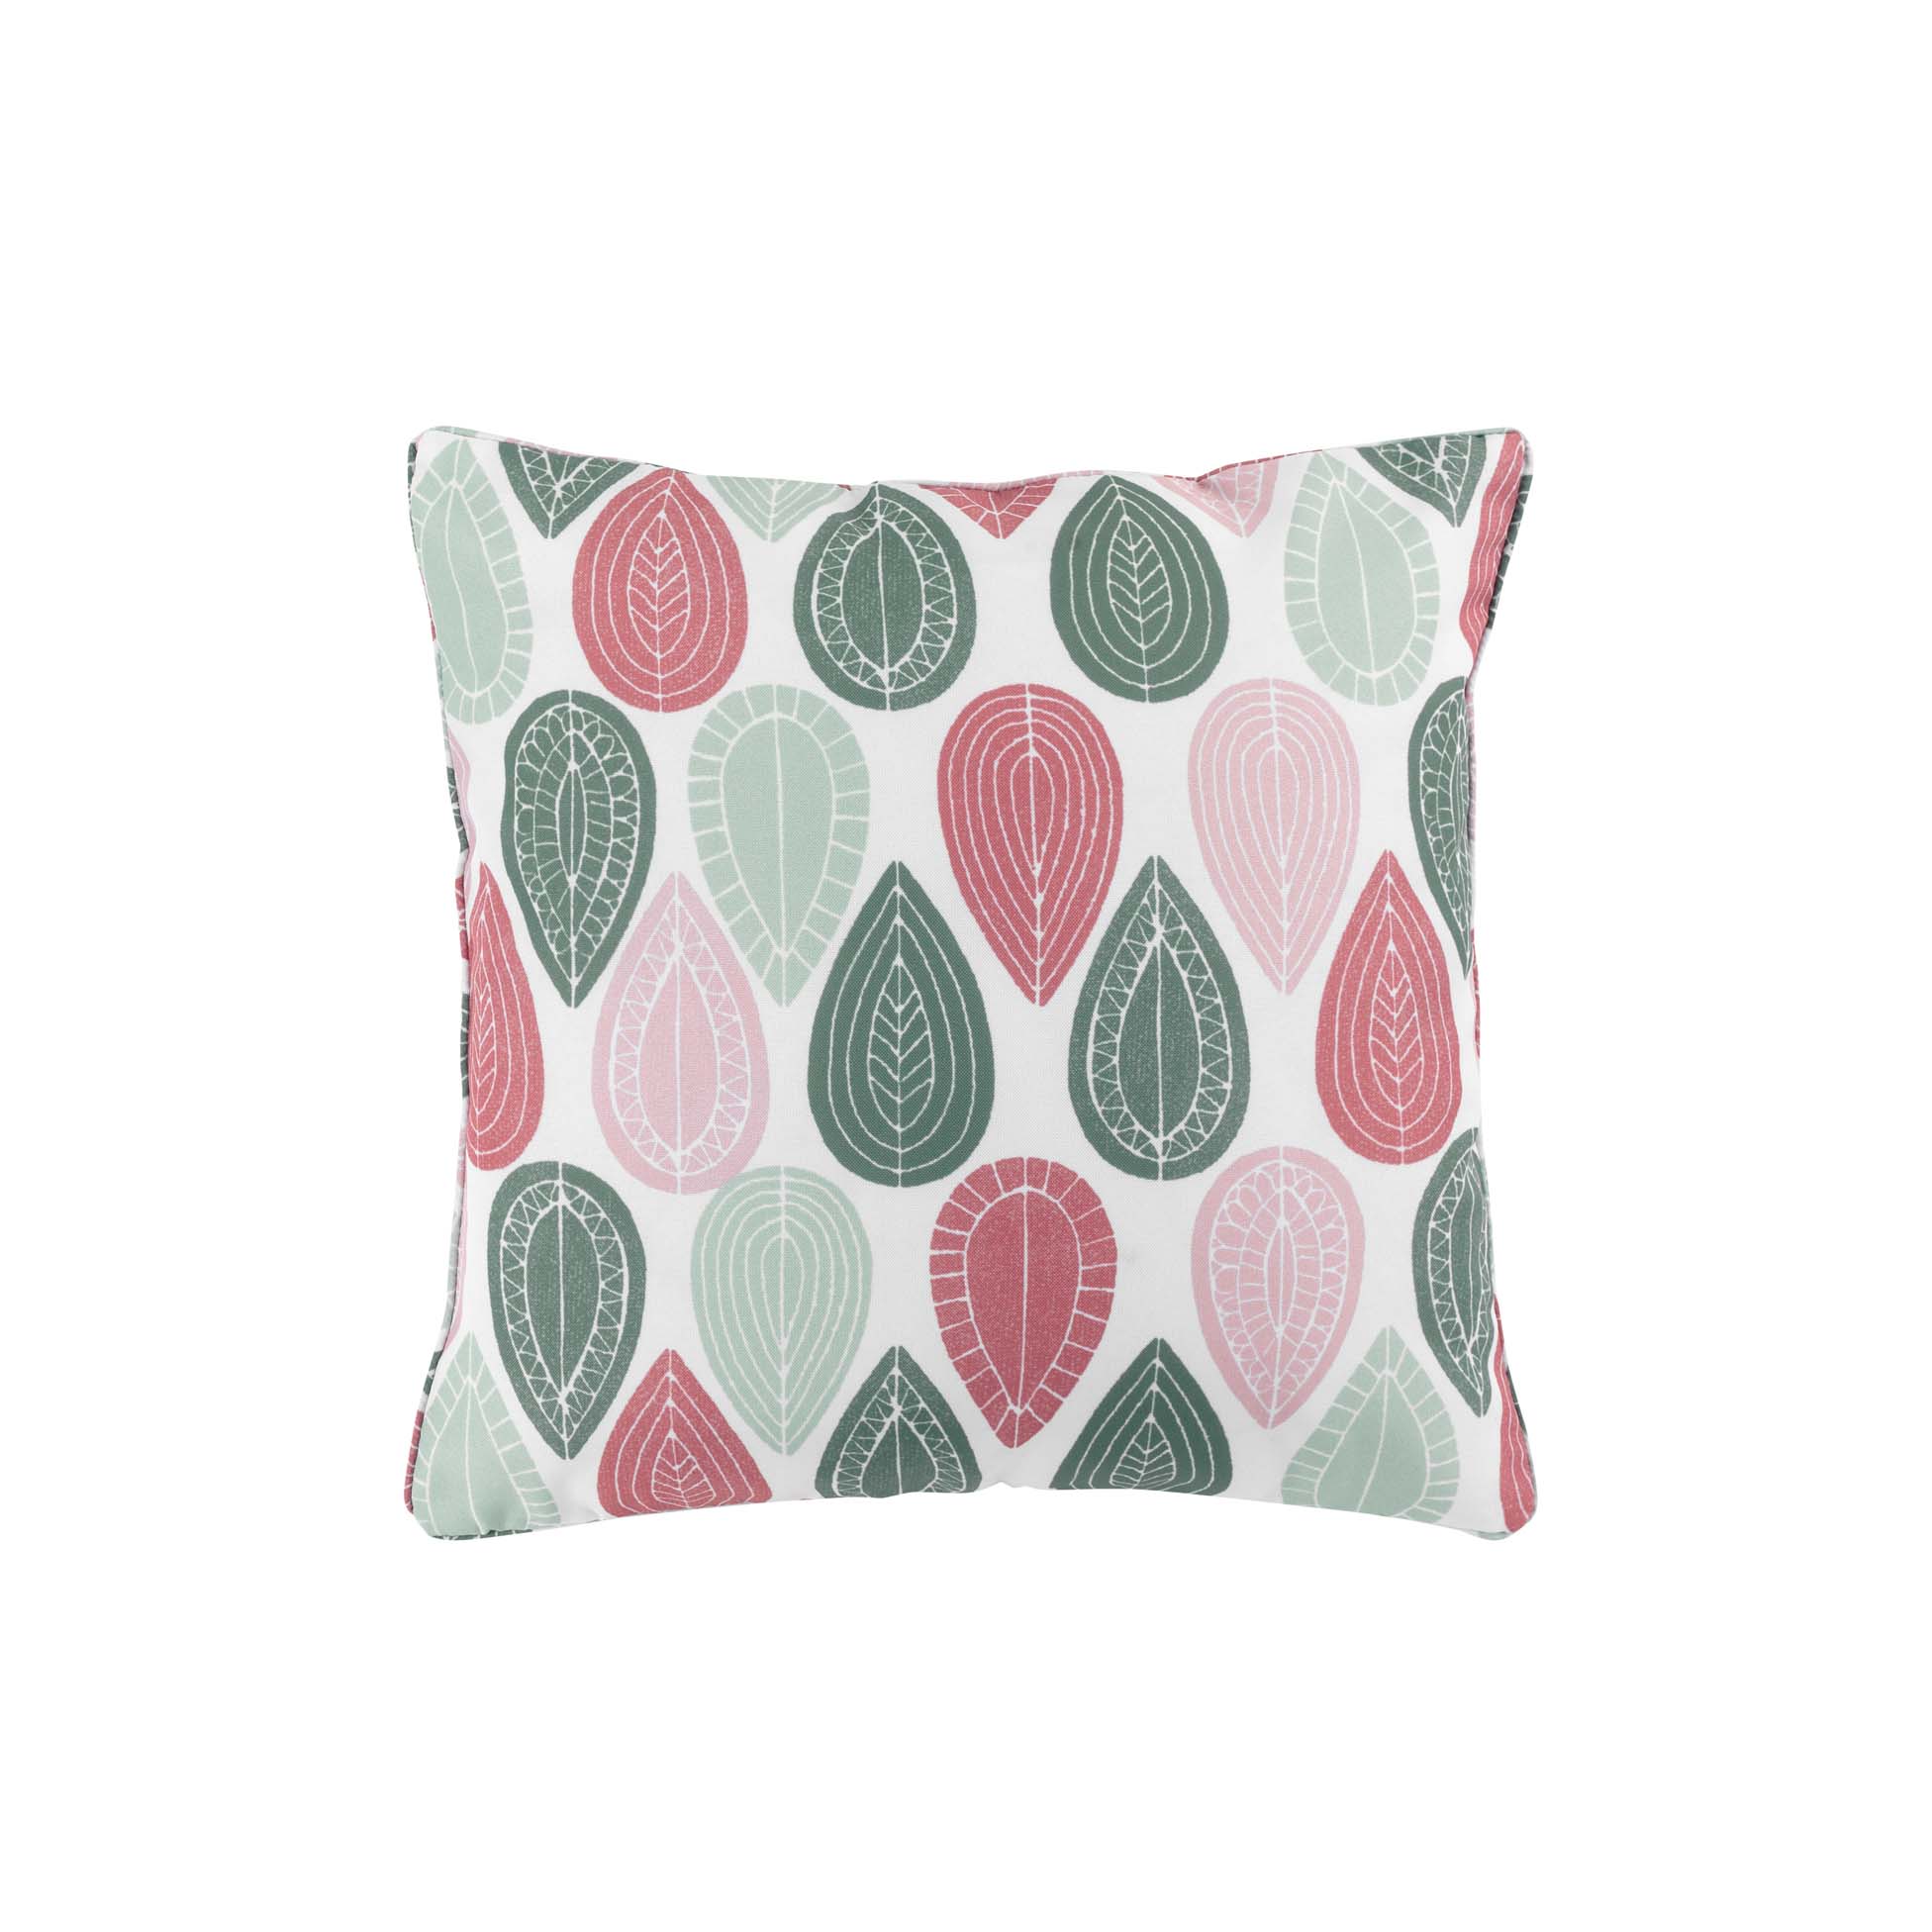 Coussin Passepoil 40 x 40 cm Palpito rose